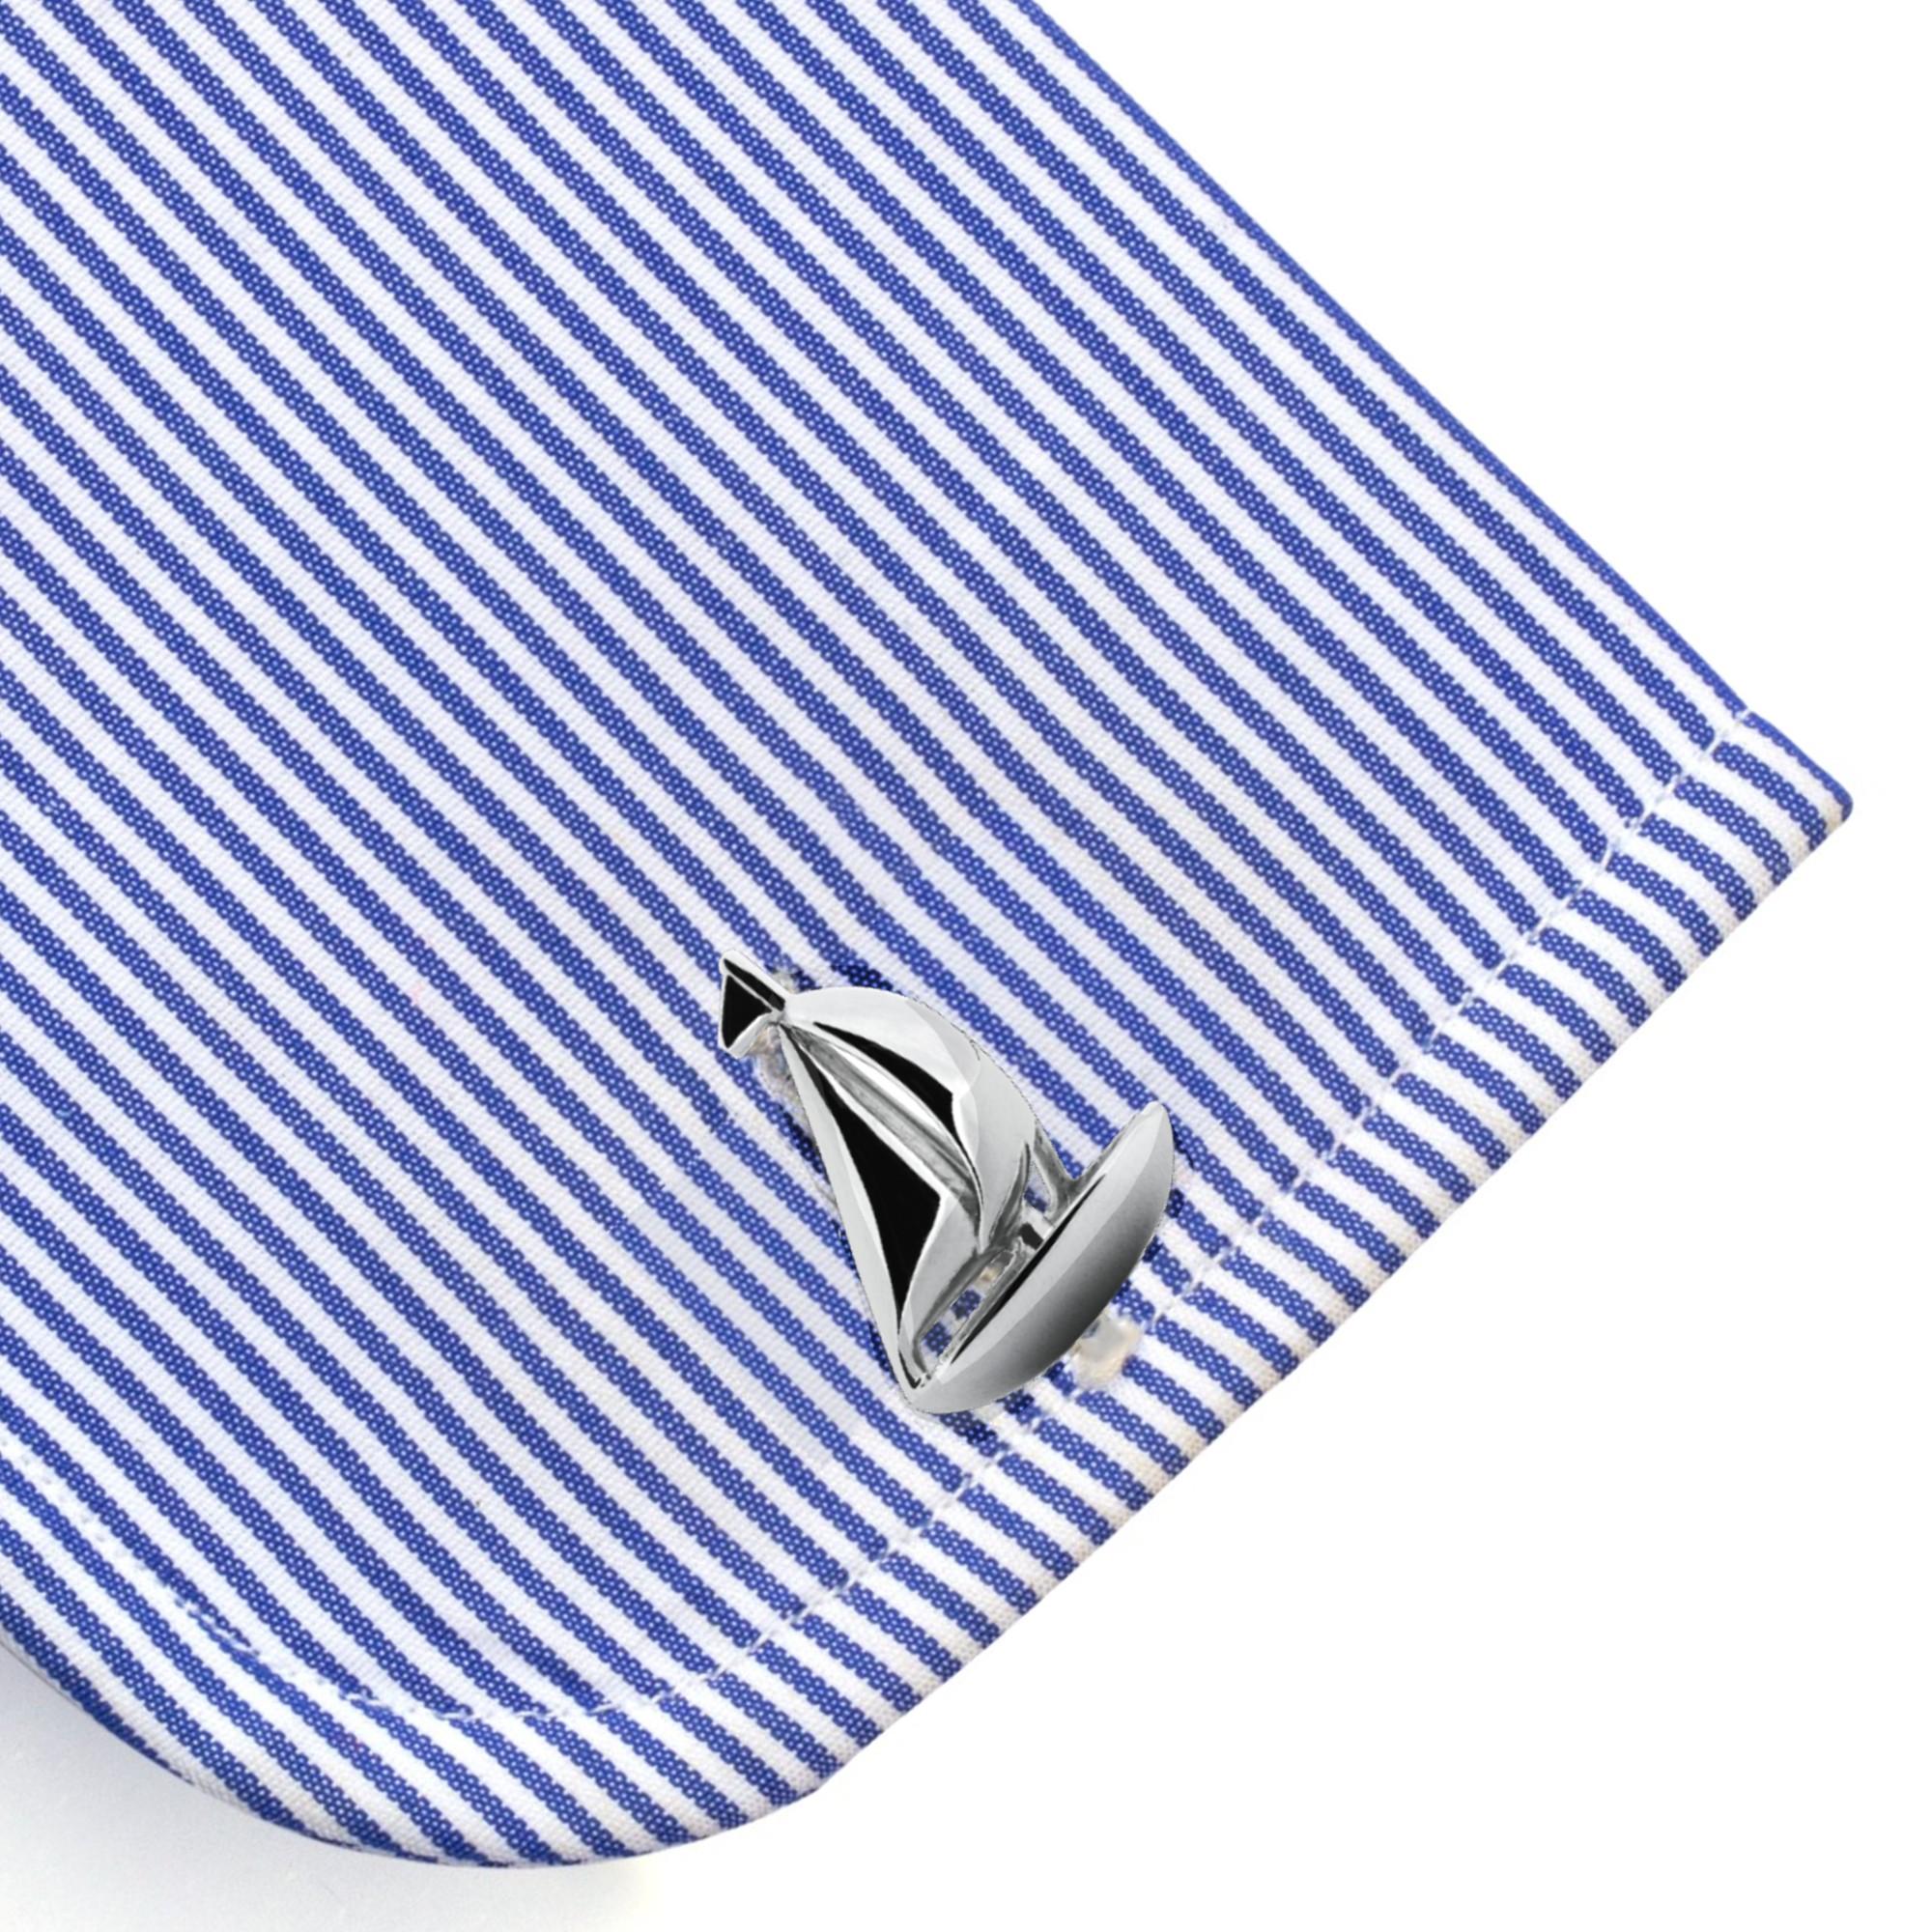 Alex Jona Sterling Silver Sail Boat Cufflinks In New Condition For Sale In Torino, IT